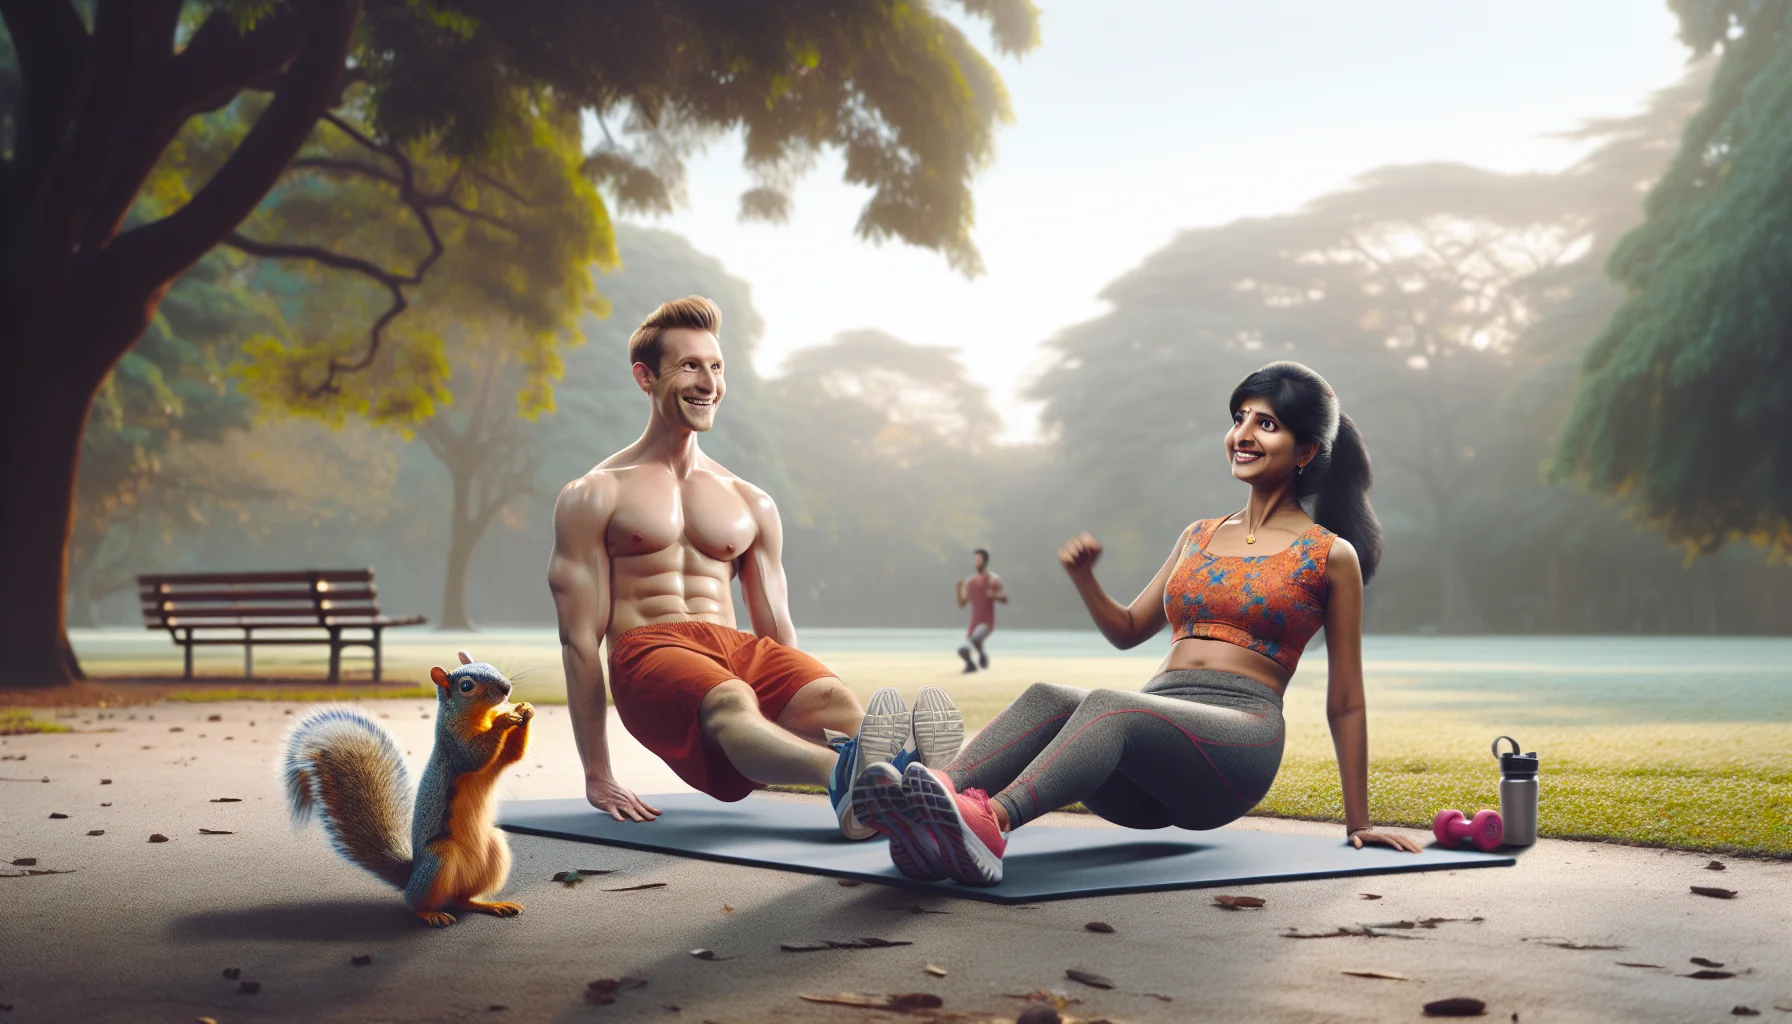 Generate an entertaining and realistic scene promoting fitness through calisthenics, focusing specifically on ab exercises. Depict a South Asian woman and a Caucasian man in a park with a lively squirrel attempting to mimic their moves. The squirrel should be trying to do an abs crunch, generating comedy. Include elements such as workout mats, nearby trees, and the soft morning light to add more depth and reality to the scene. The objective of this image is to inspire people with a blend of humor and fitness.